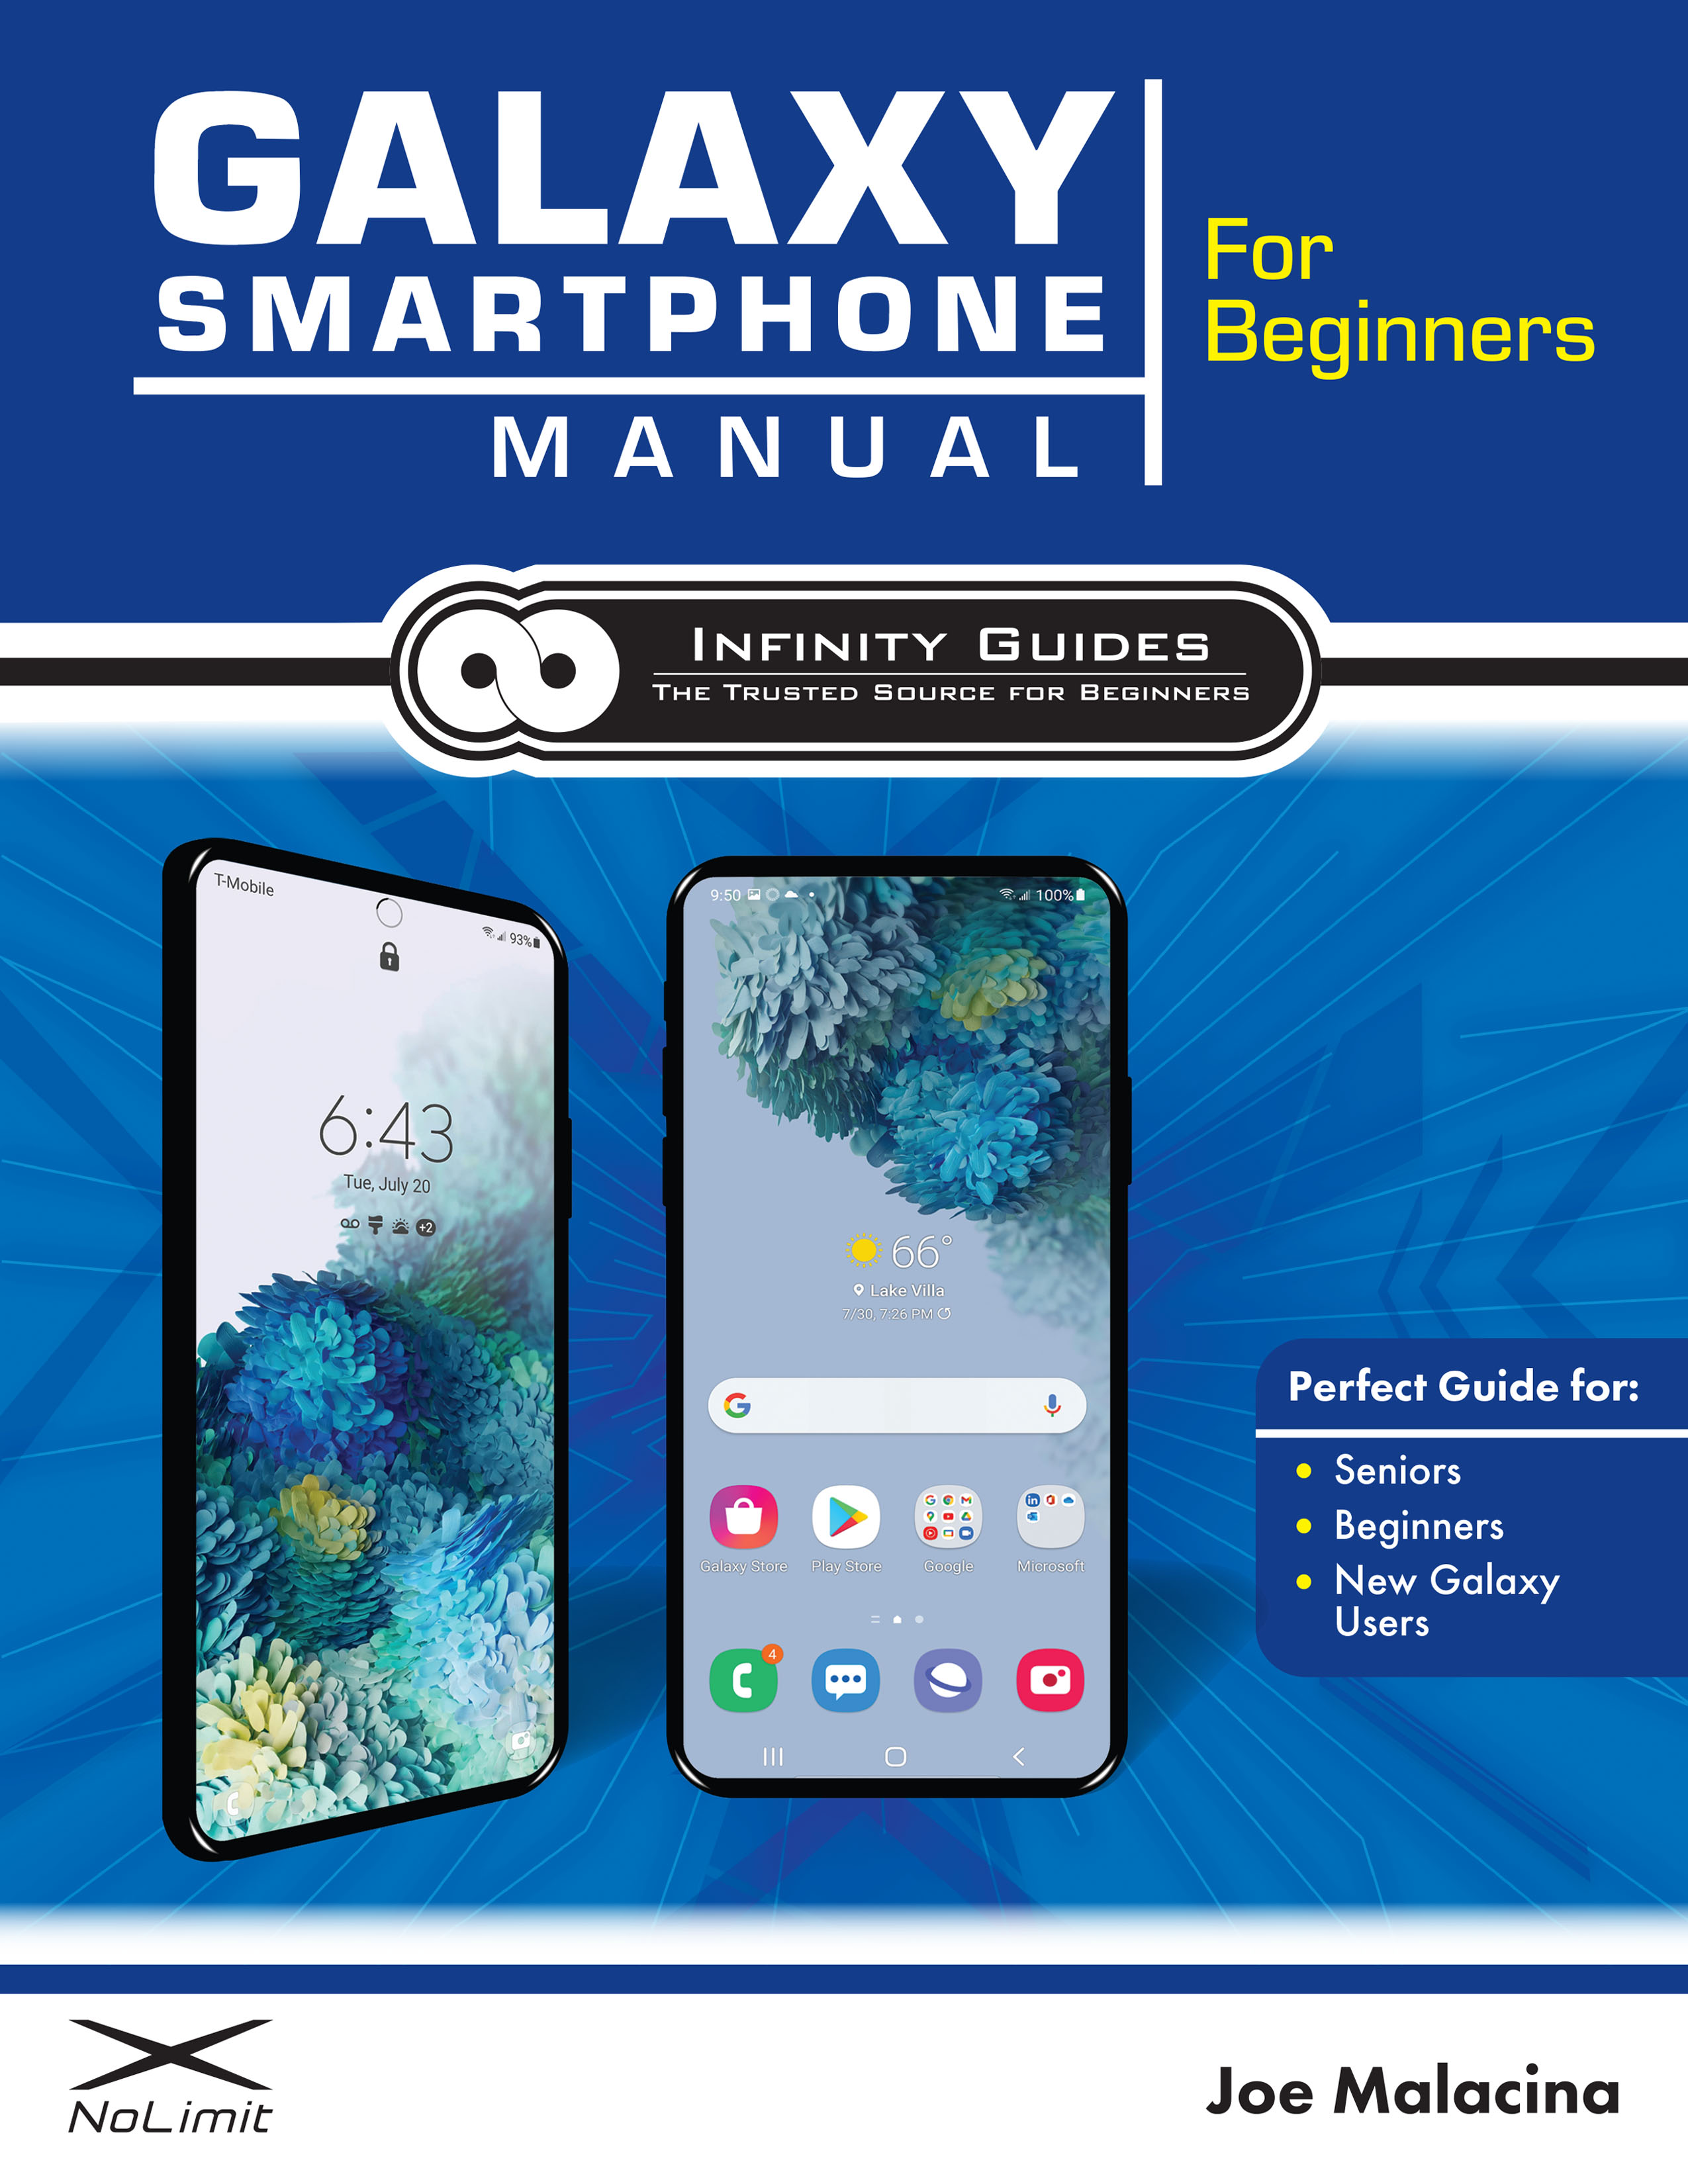 Galaxy Smartphone Manual for Beginners